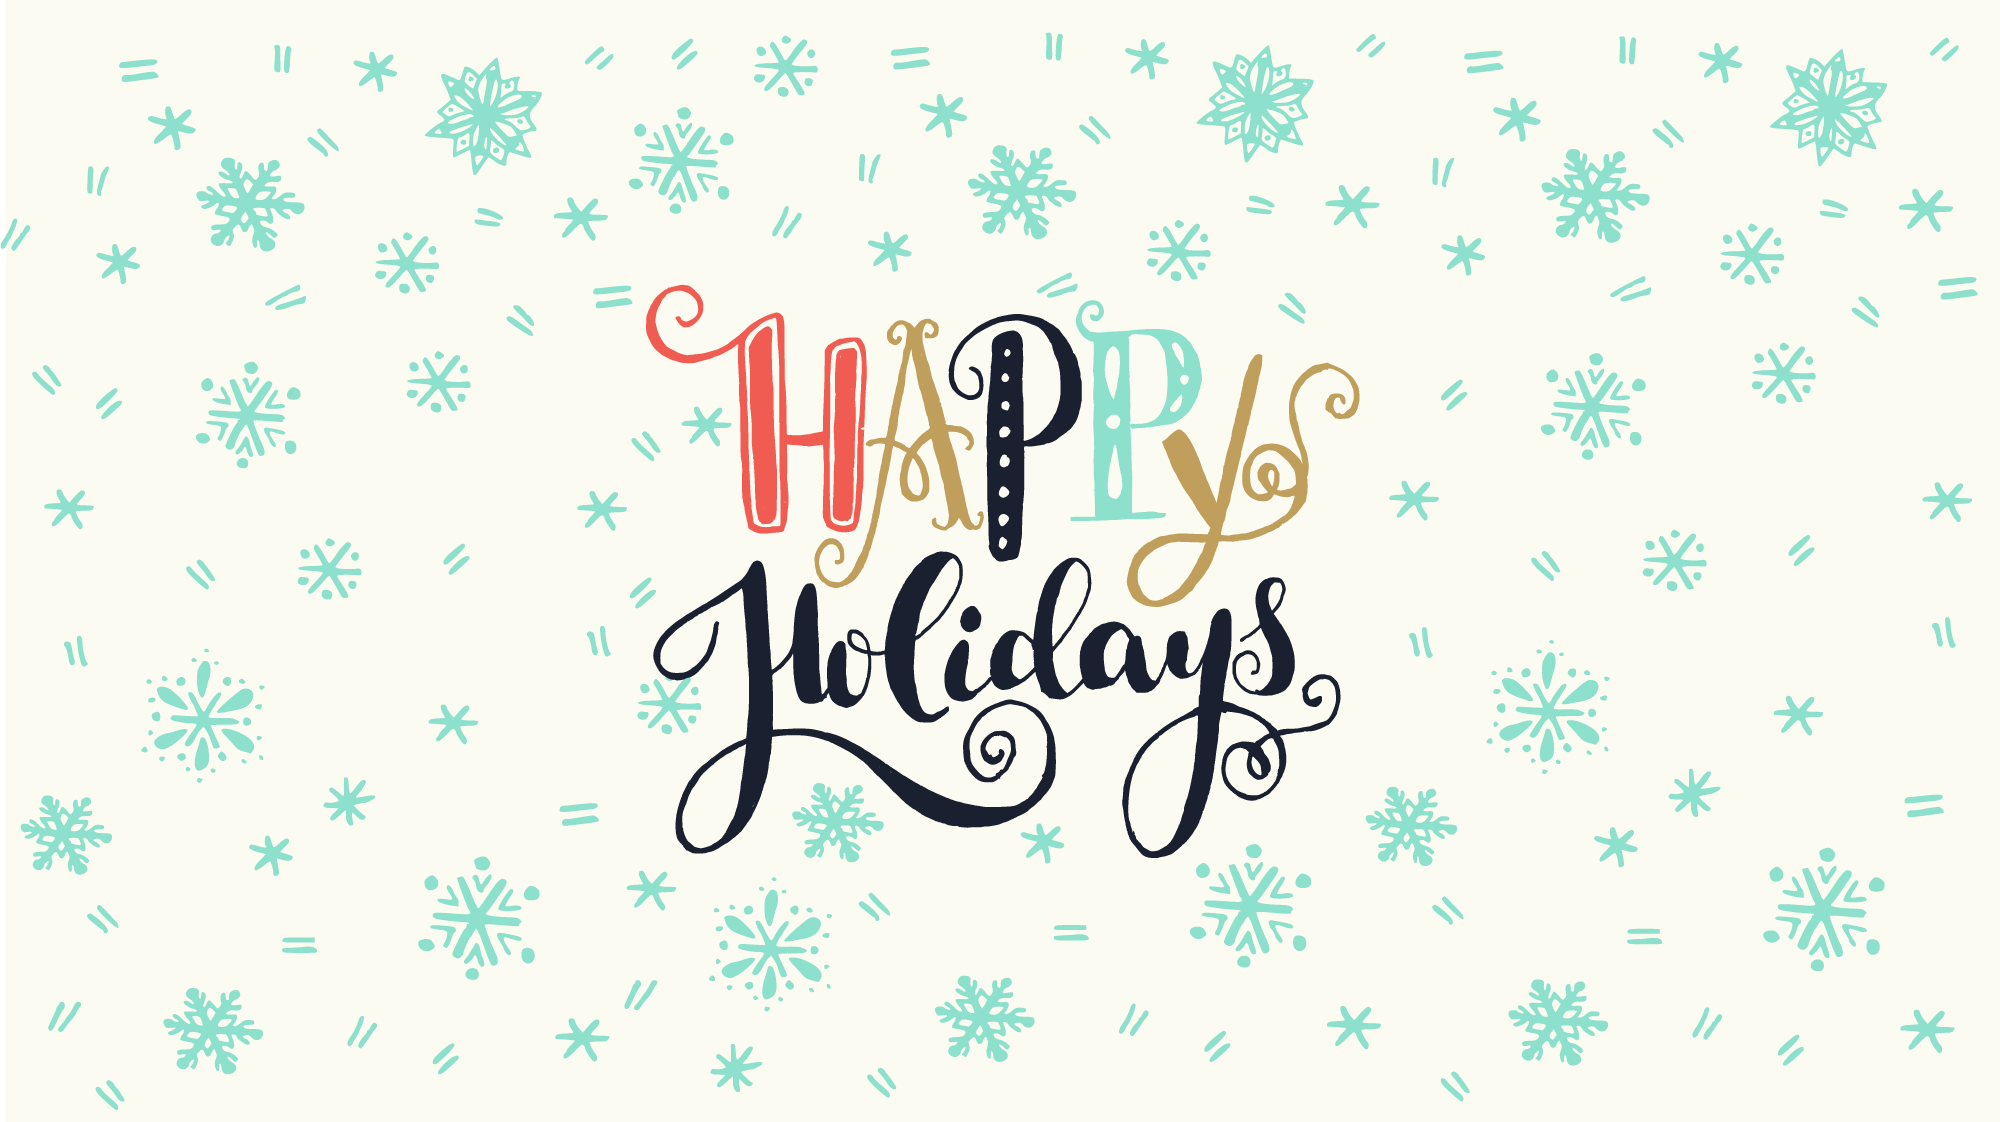 Happy Holidays from Simplicity, home of Prolegis Real Estate